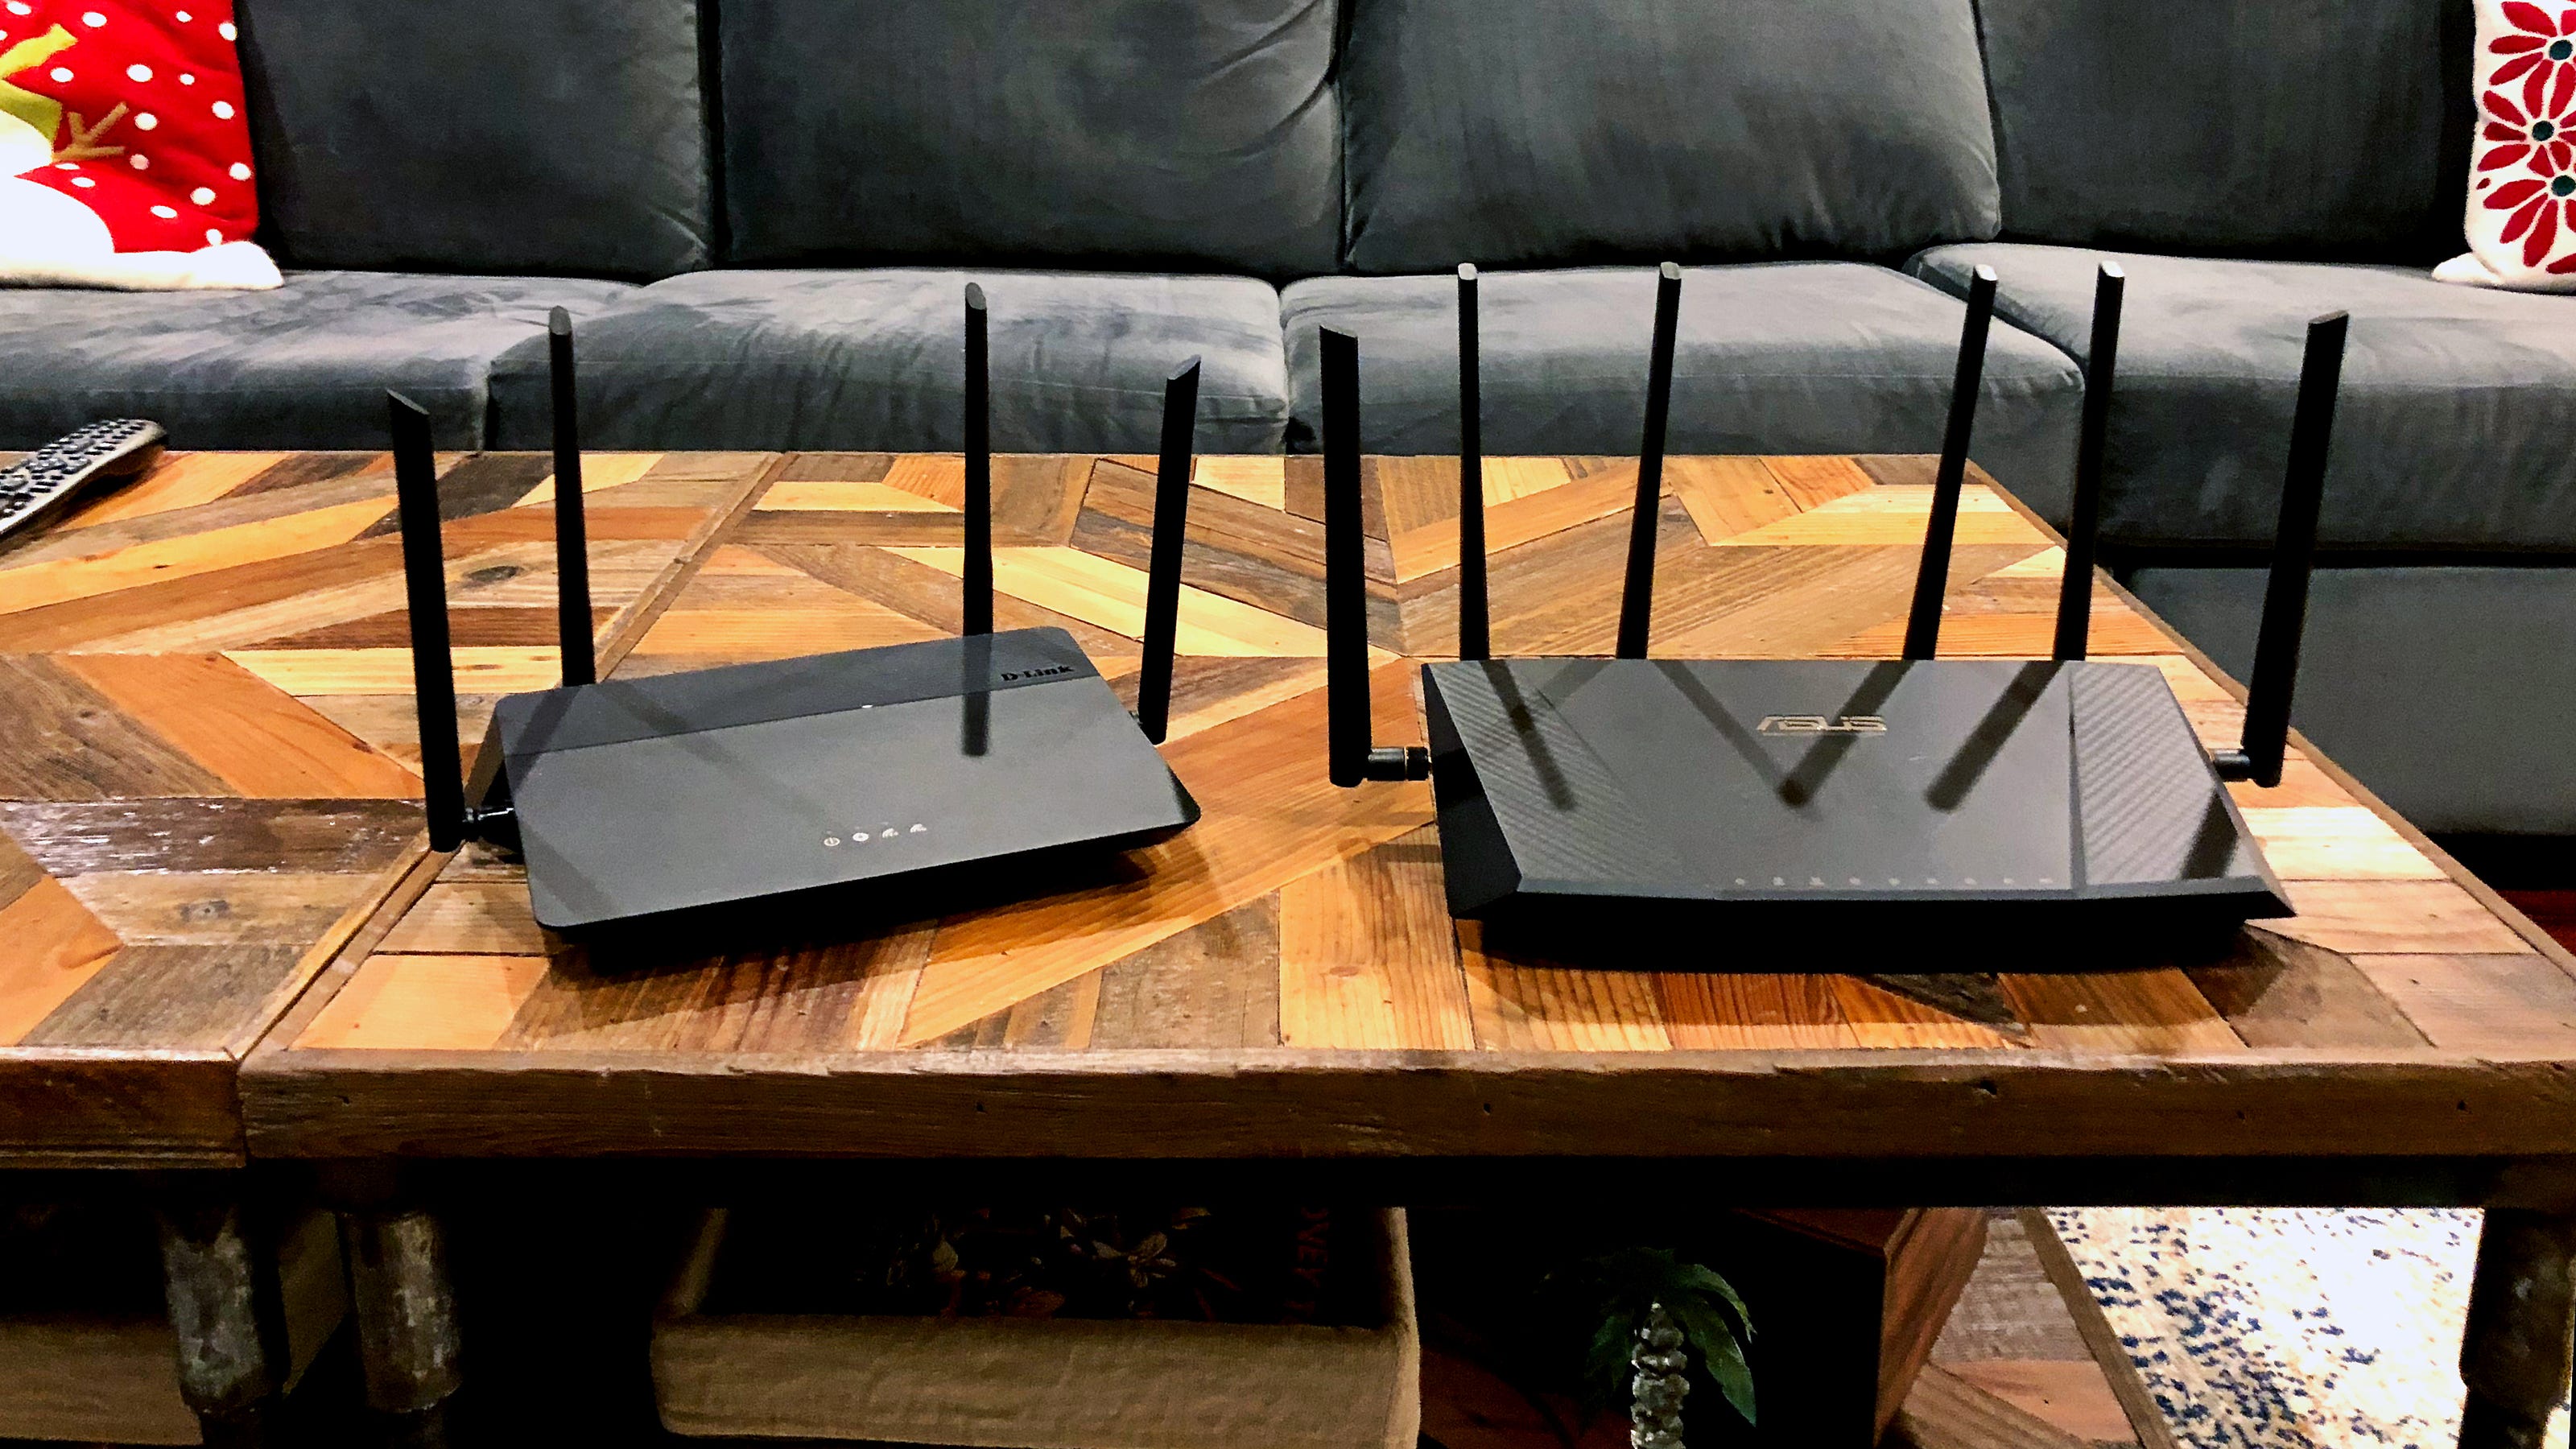 Vermelding Tirannie Storing Best WiFi Routers of 2019: the best ways to improve your internet